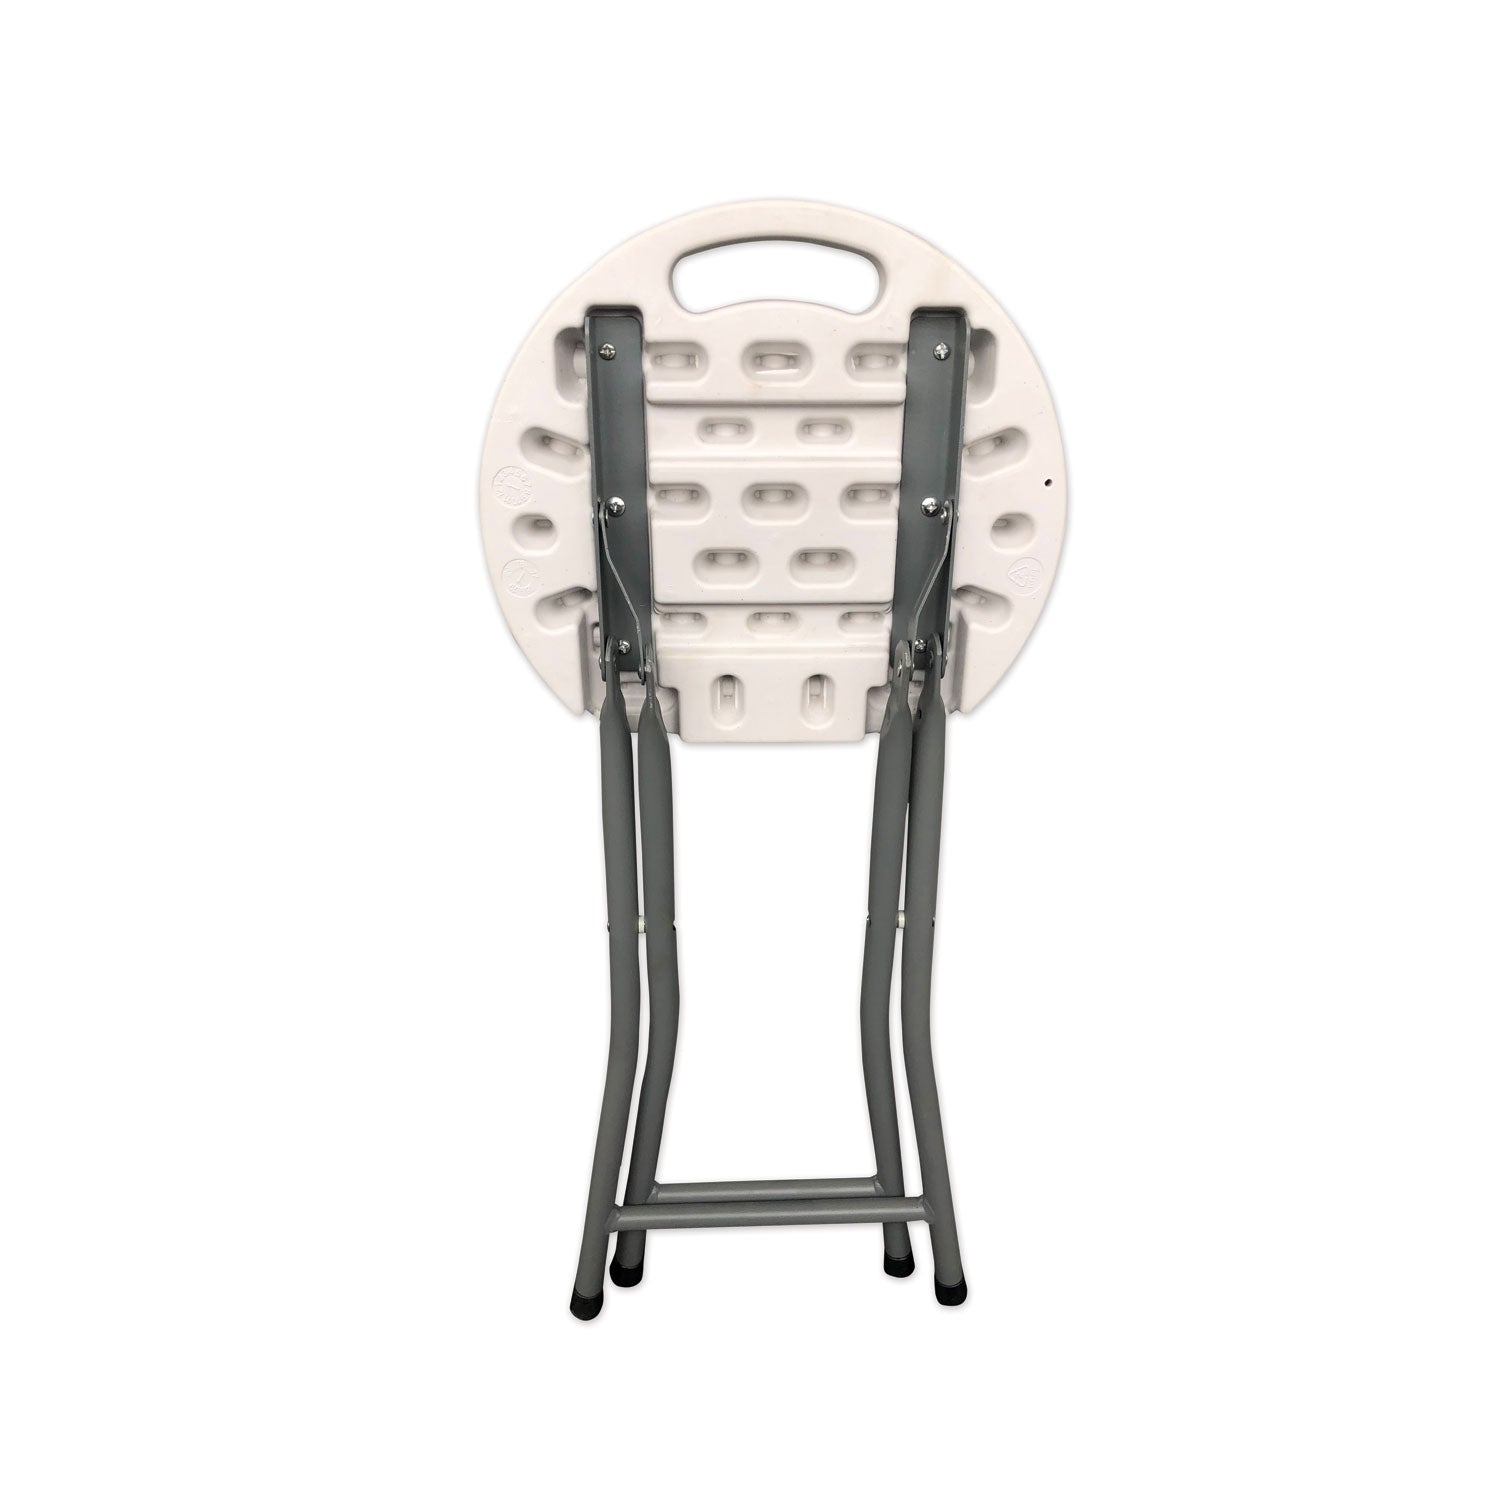 rough-n-ready-folding-stool-backless-supports-up-to-300-lb-18-seat-height-white-seat-charcoal-base-4-carton_ice64563 - 2